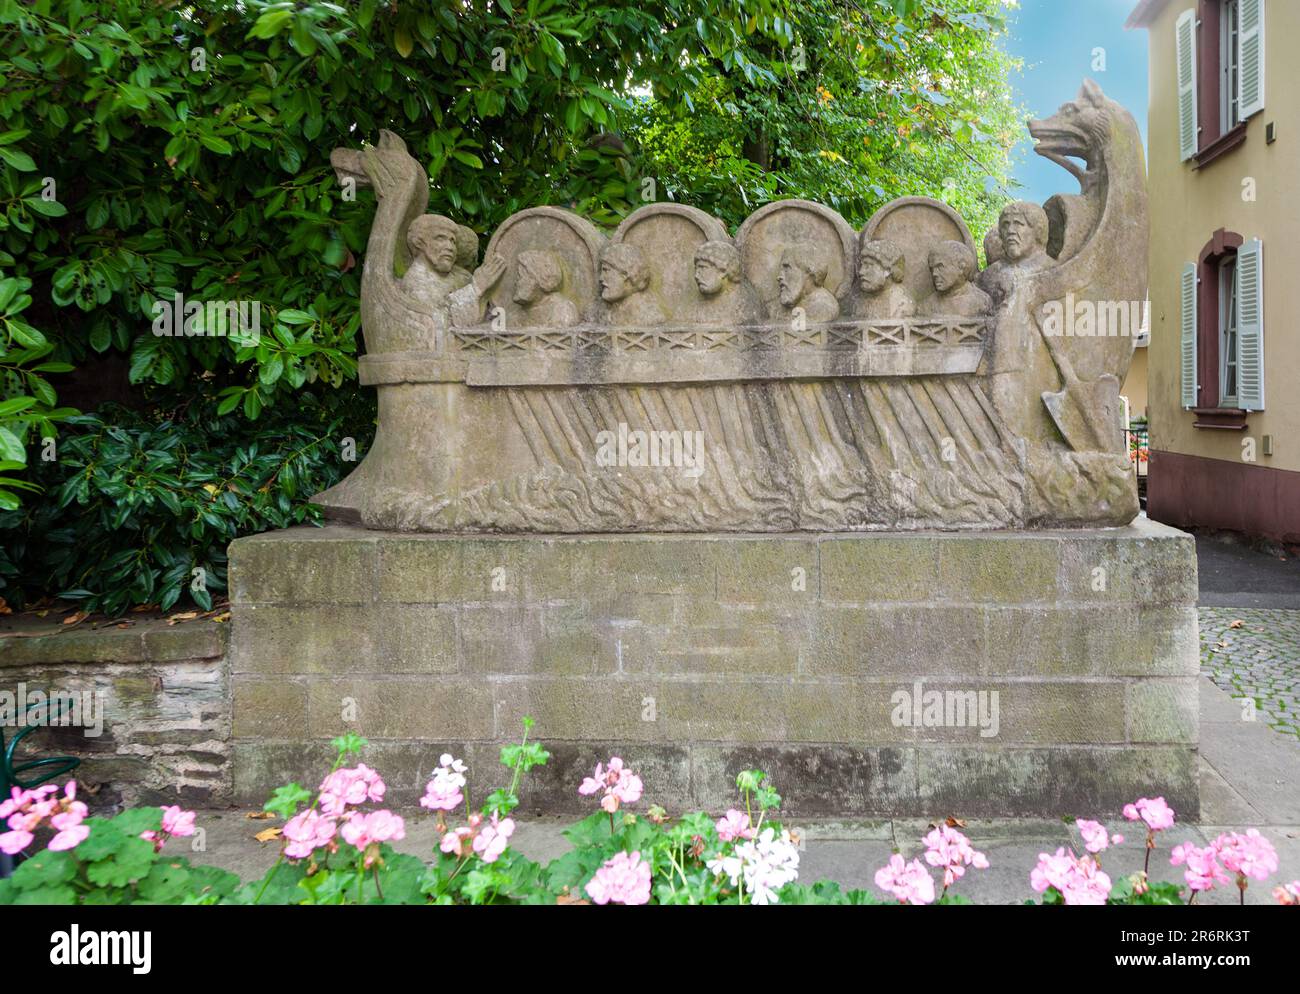 Neumagen, Germany - September 19, 2009: stone statue of the ship of a wine merchant with barrels in Neumagen Dhron from roman times. Stock Photo